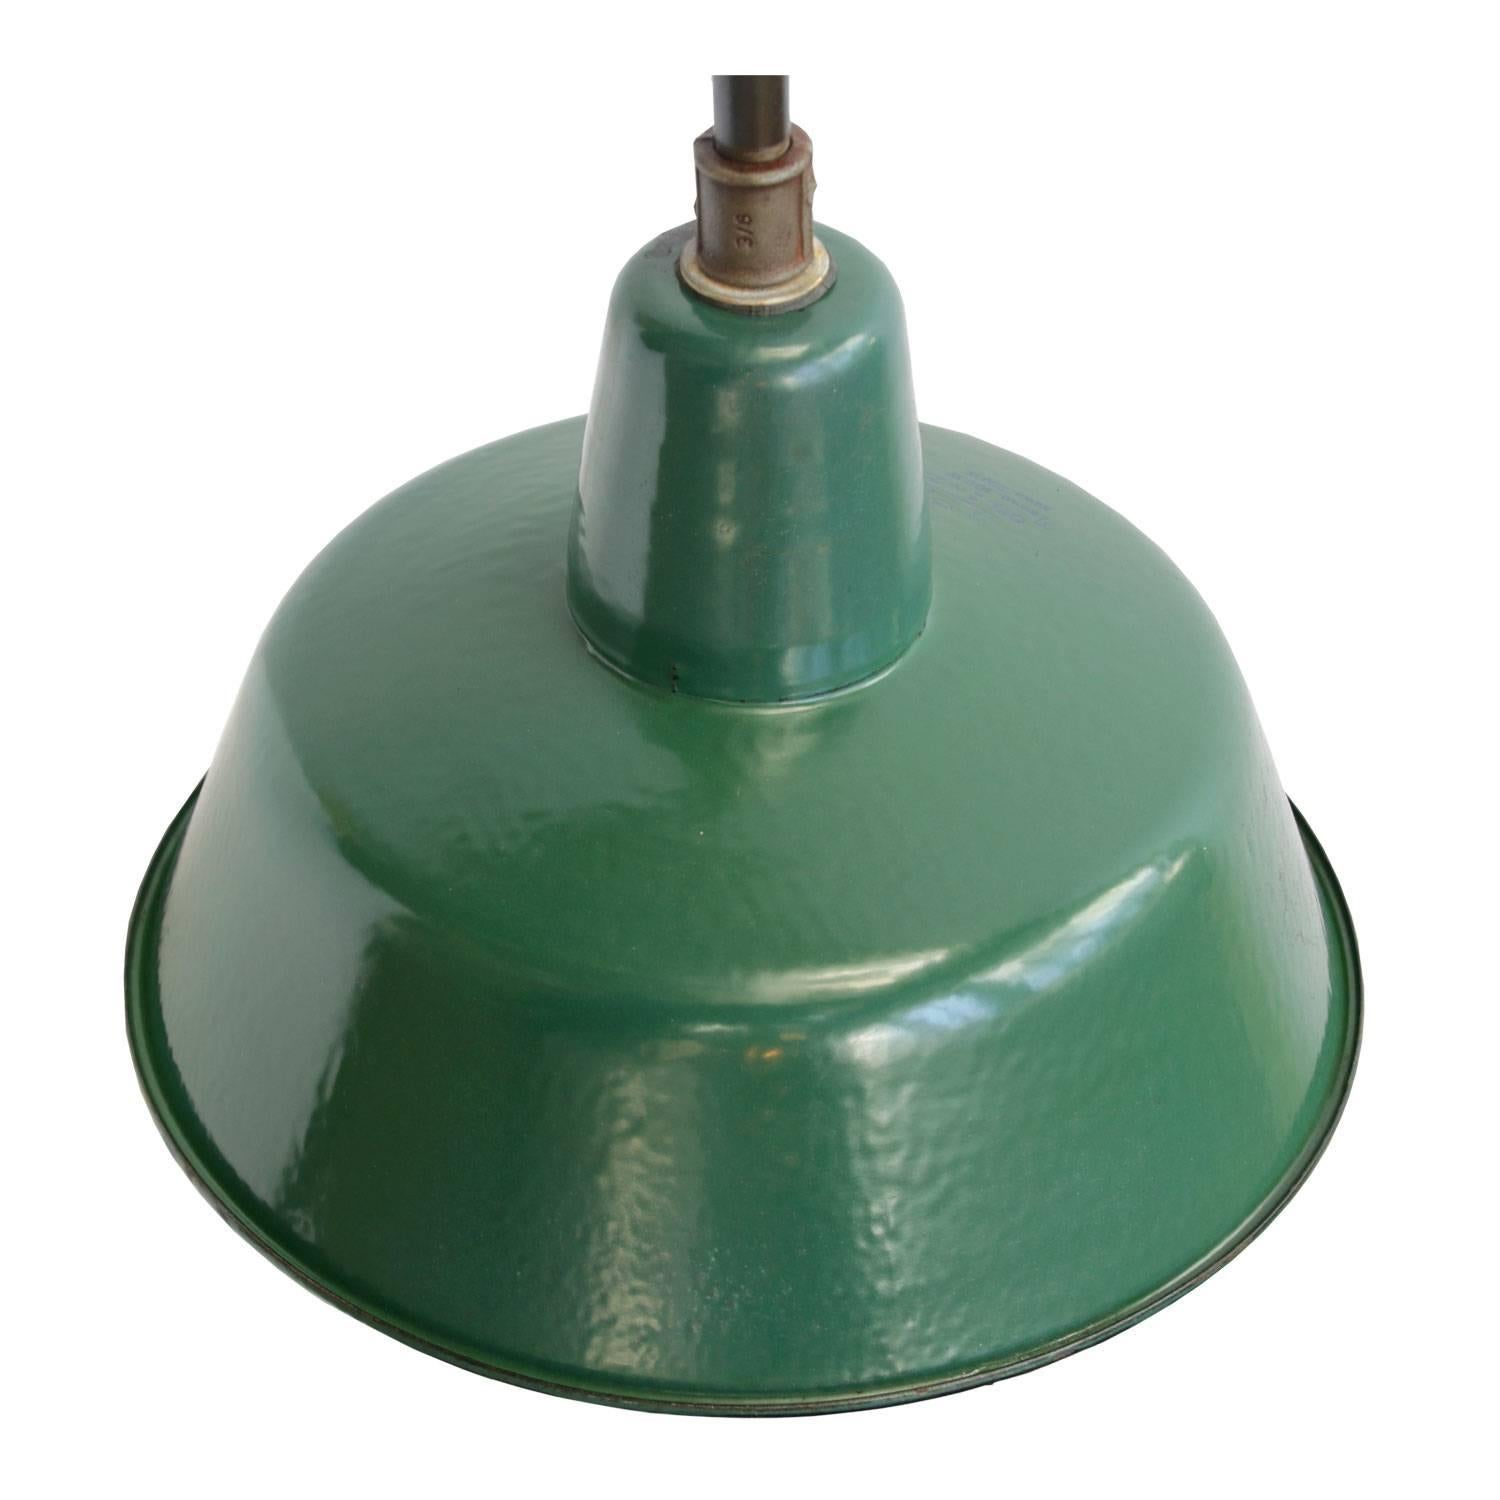 Industrial wall light, green coloured enamel shade, white interior, cast iron arm. 
Diameter cast iron wall piece: 12 cm (4.7 inch) three holes to secure.

Weight: 3.1 kg / 6.8 lb

Priced per individual item. All lamps have been made suitable by